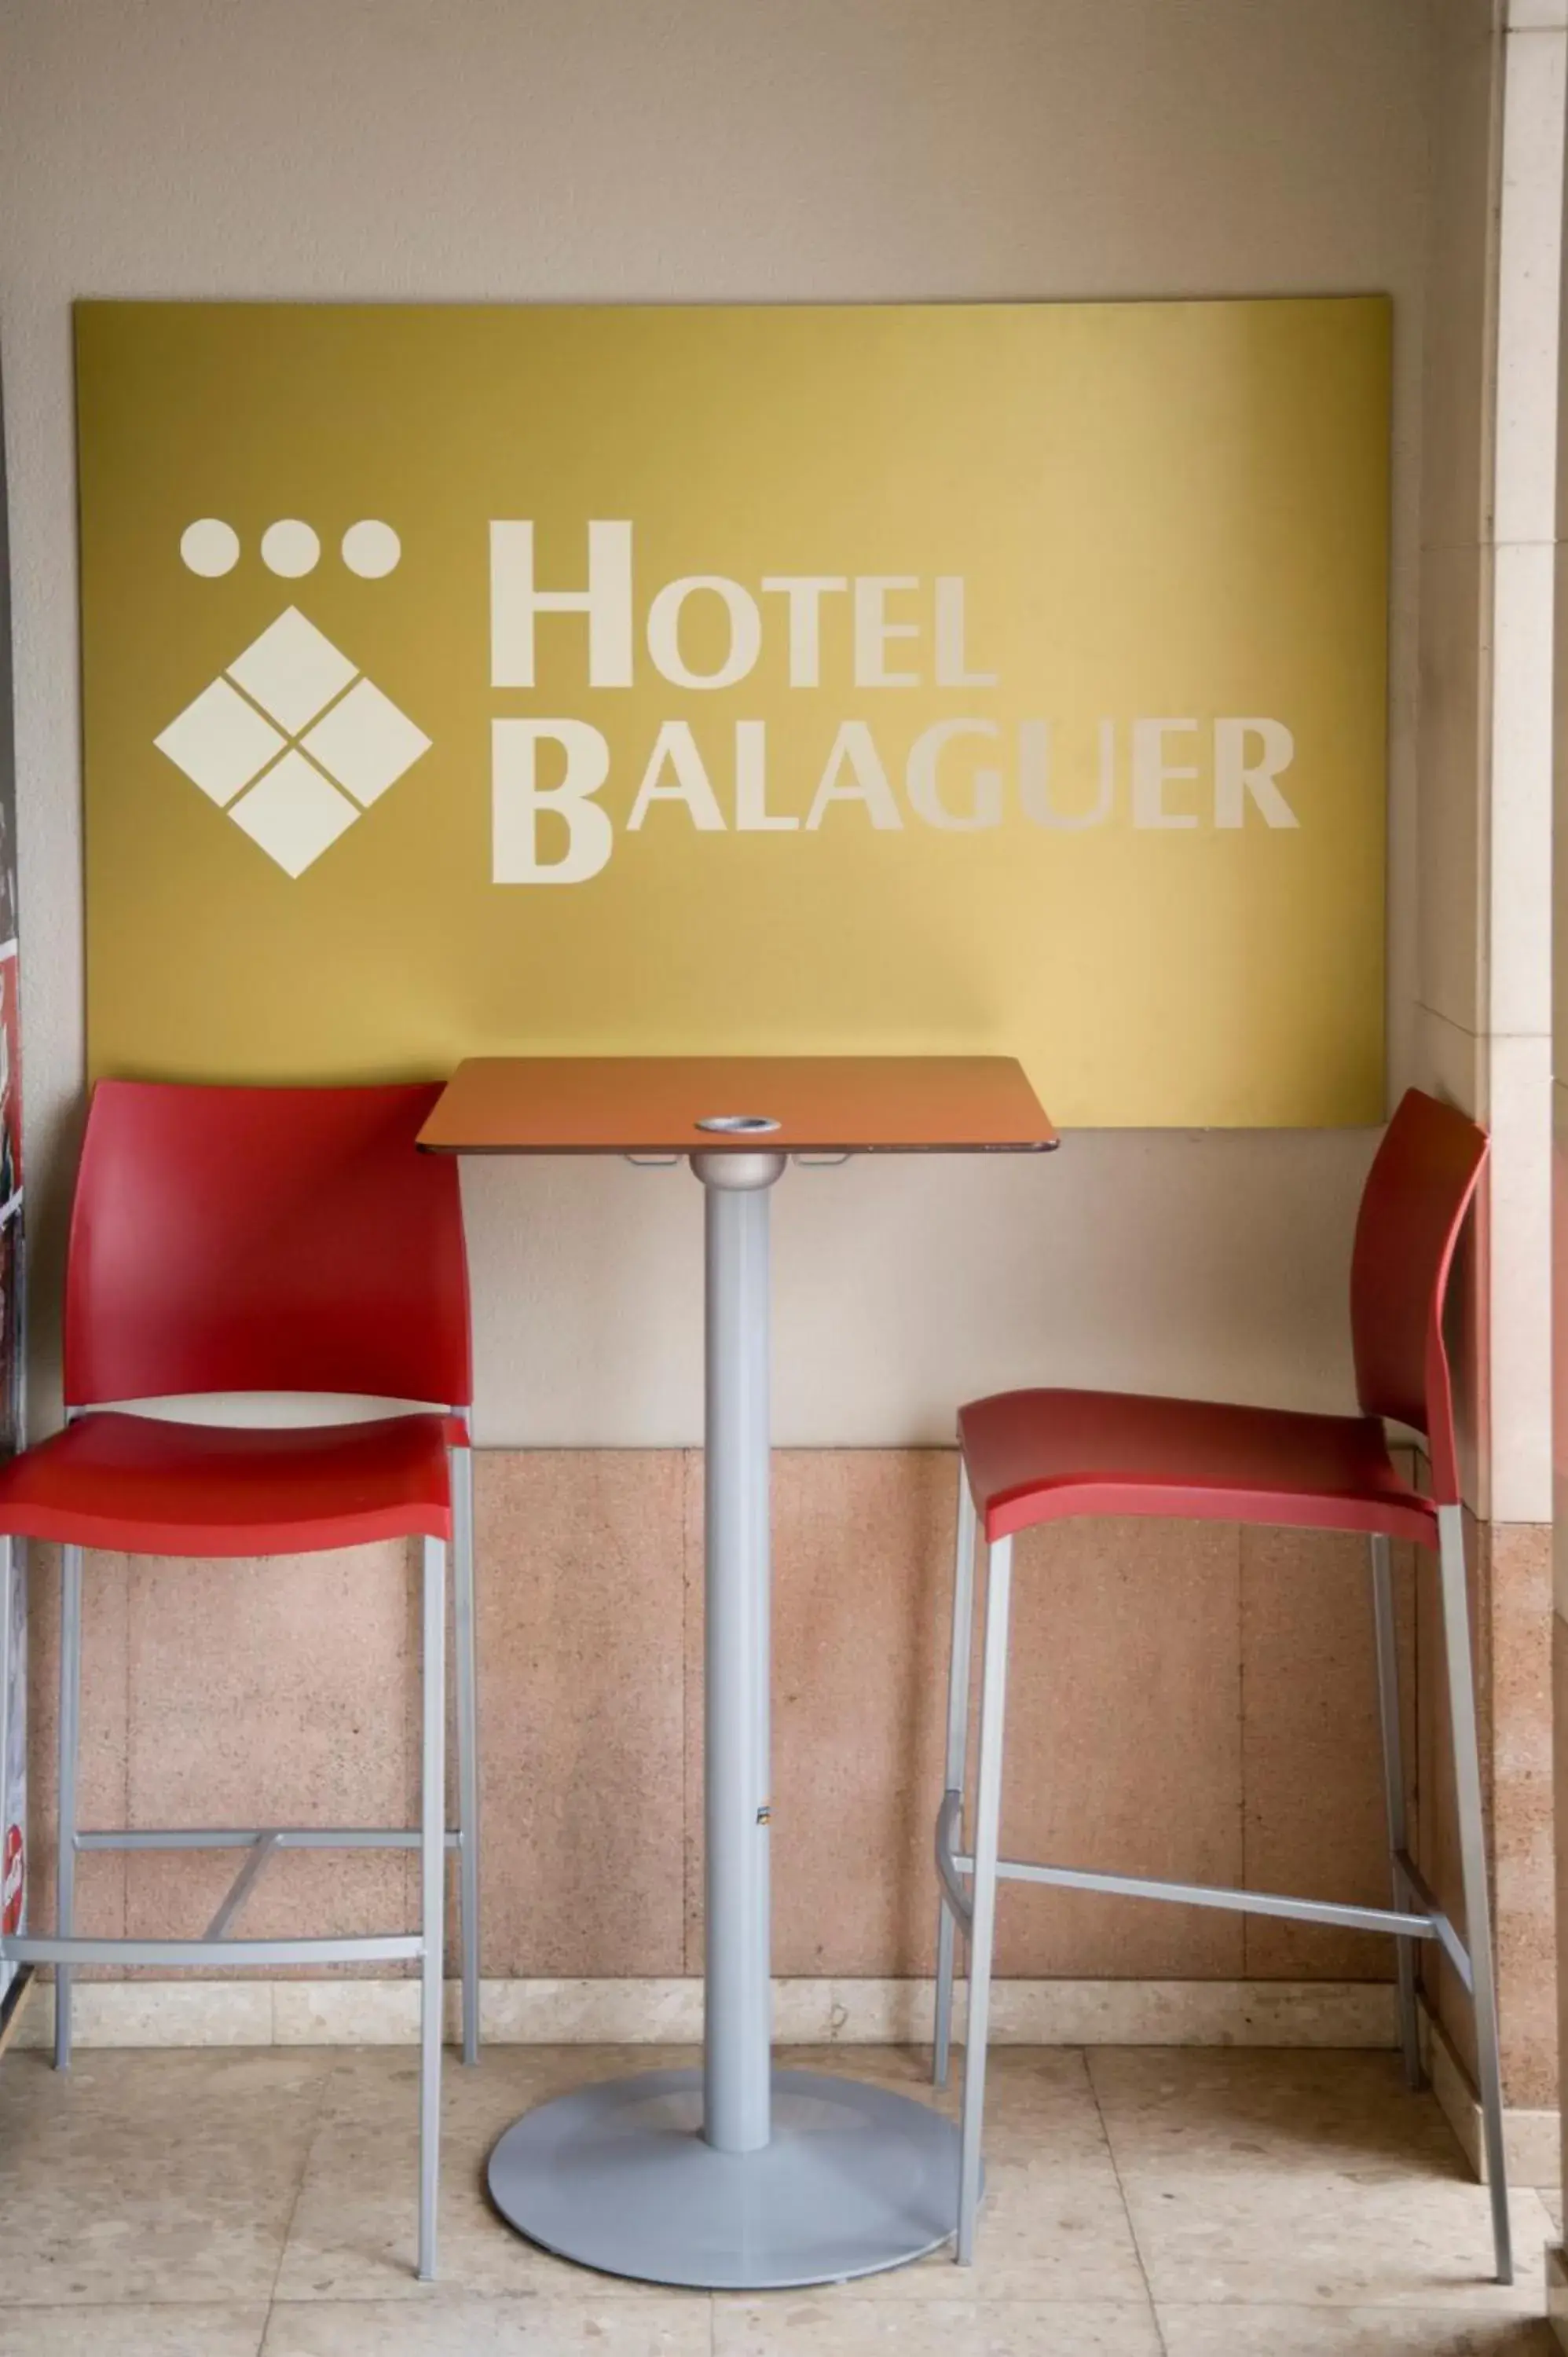 Property logo or sign in Hotel Balaguer